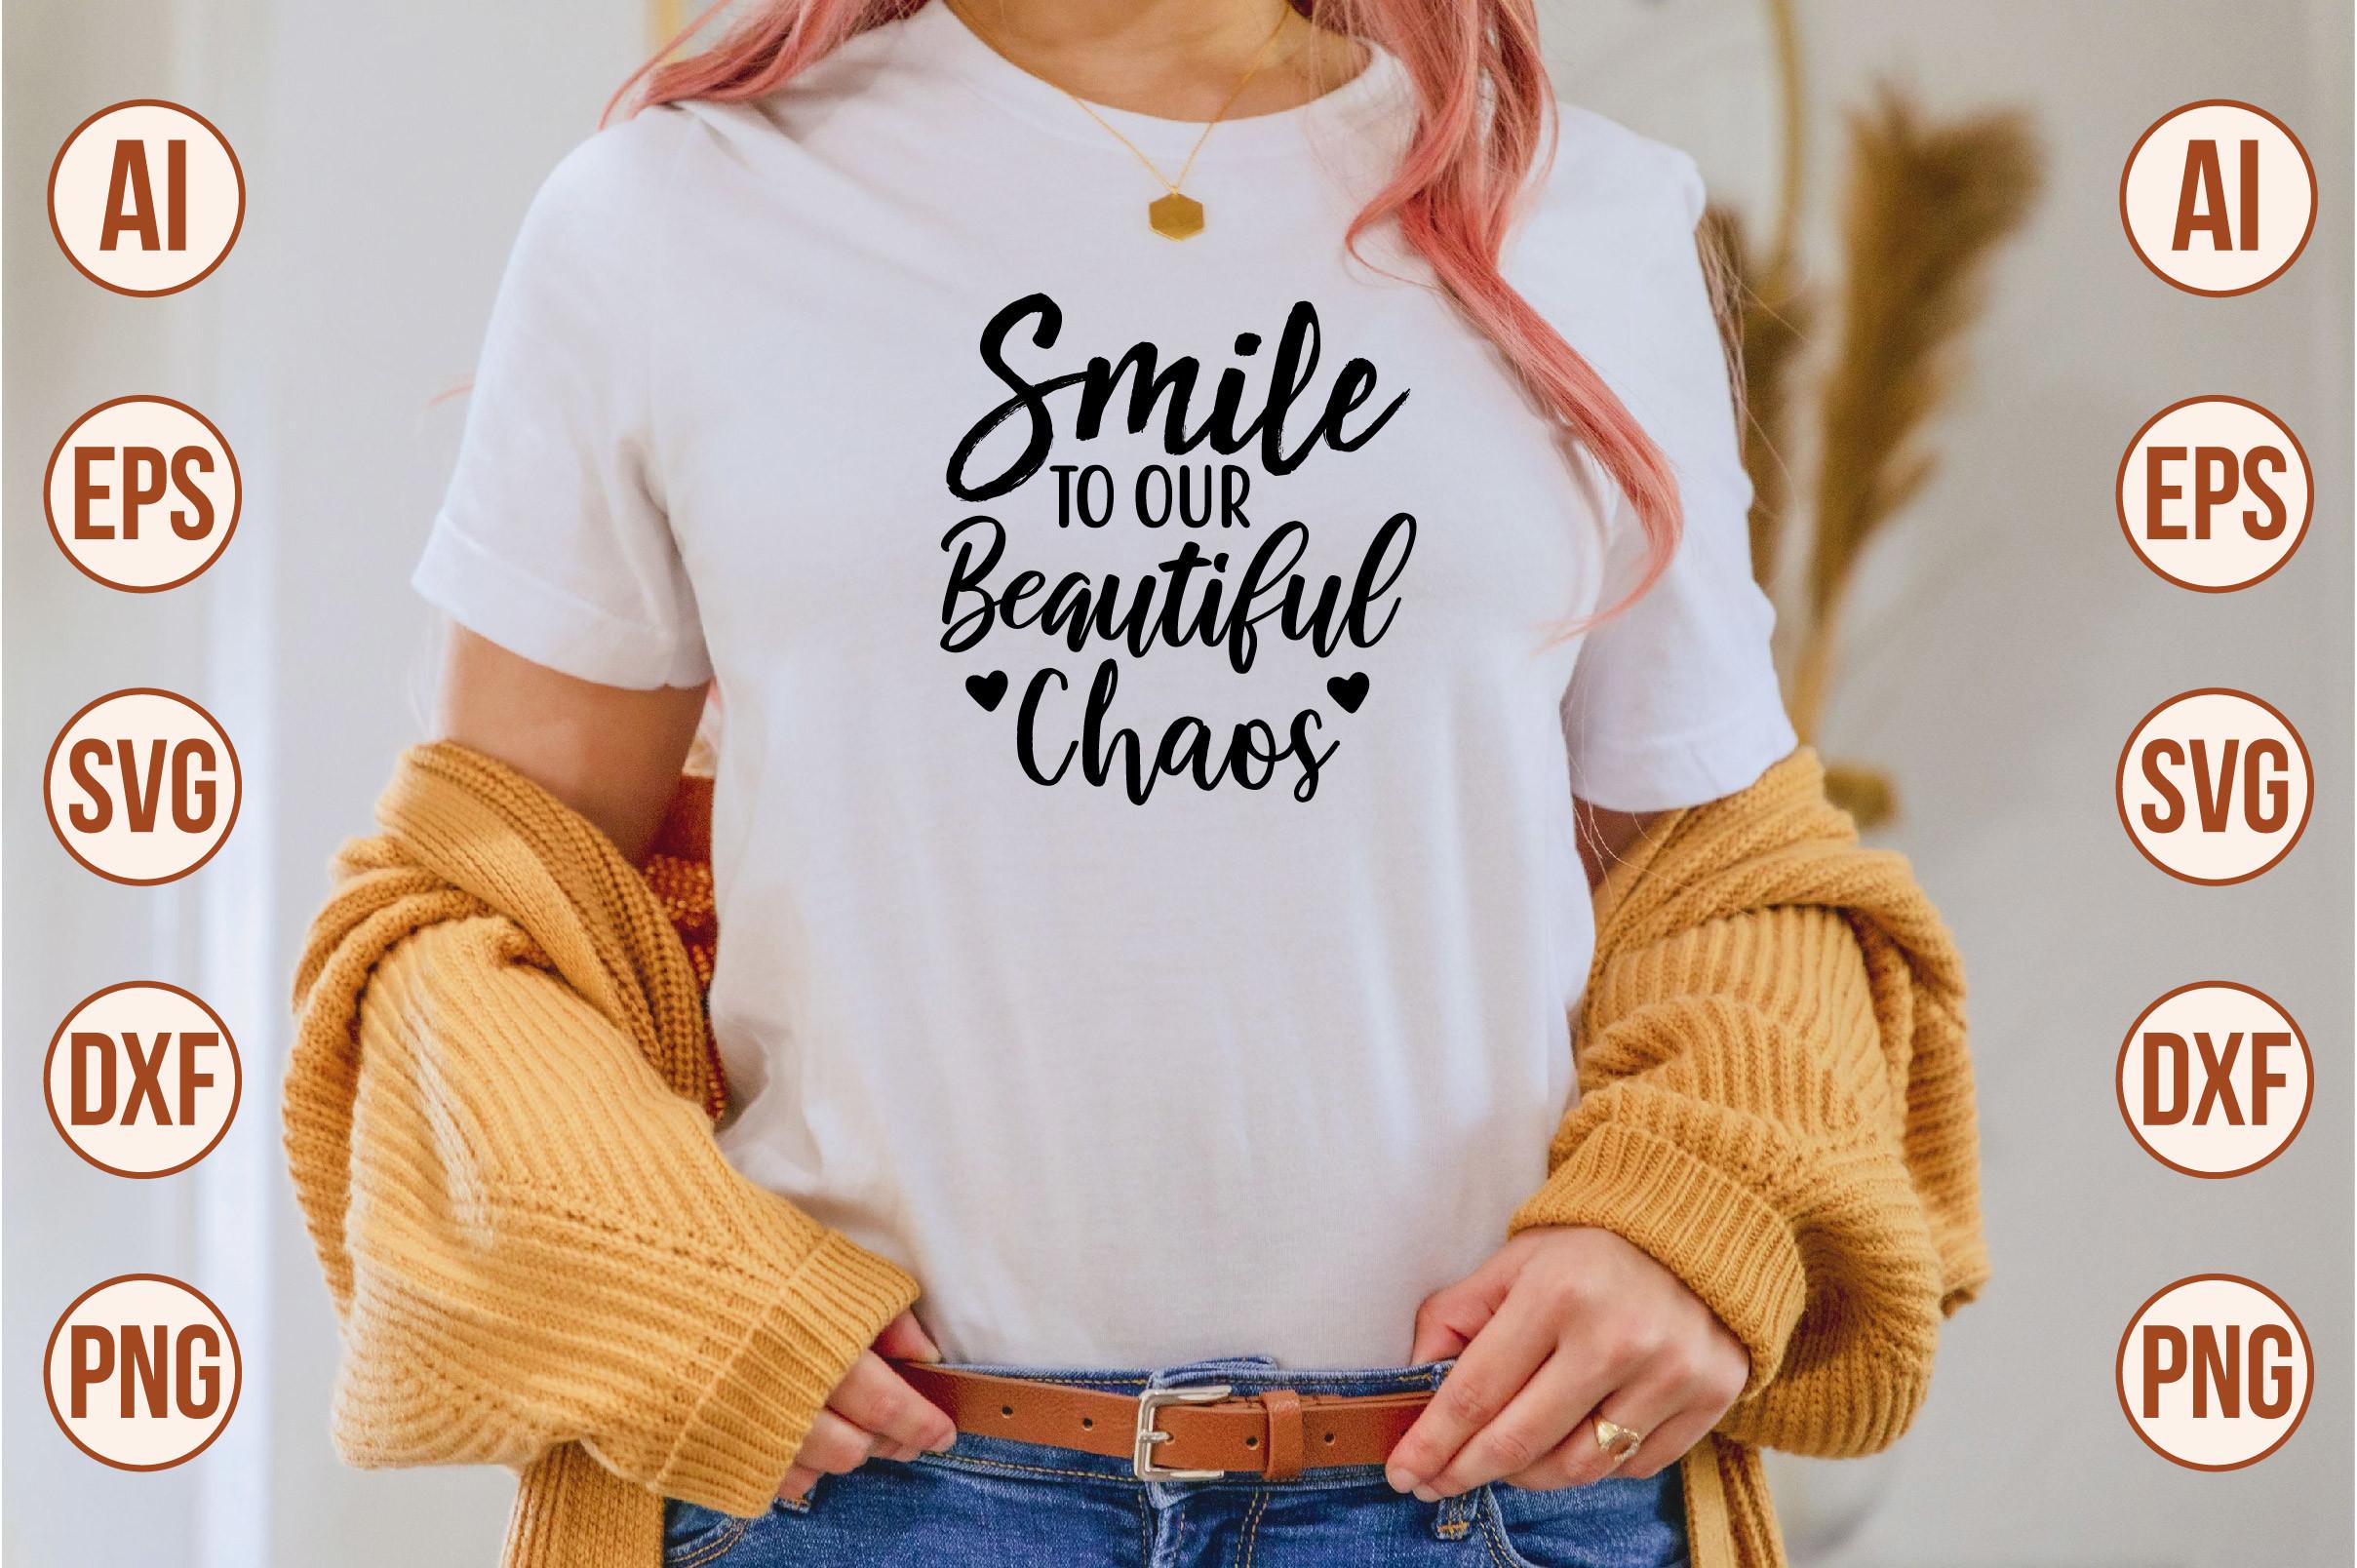 Smile to Our Beautiful Chaos